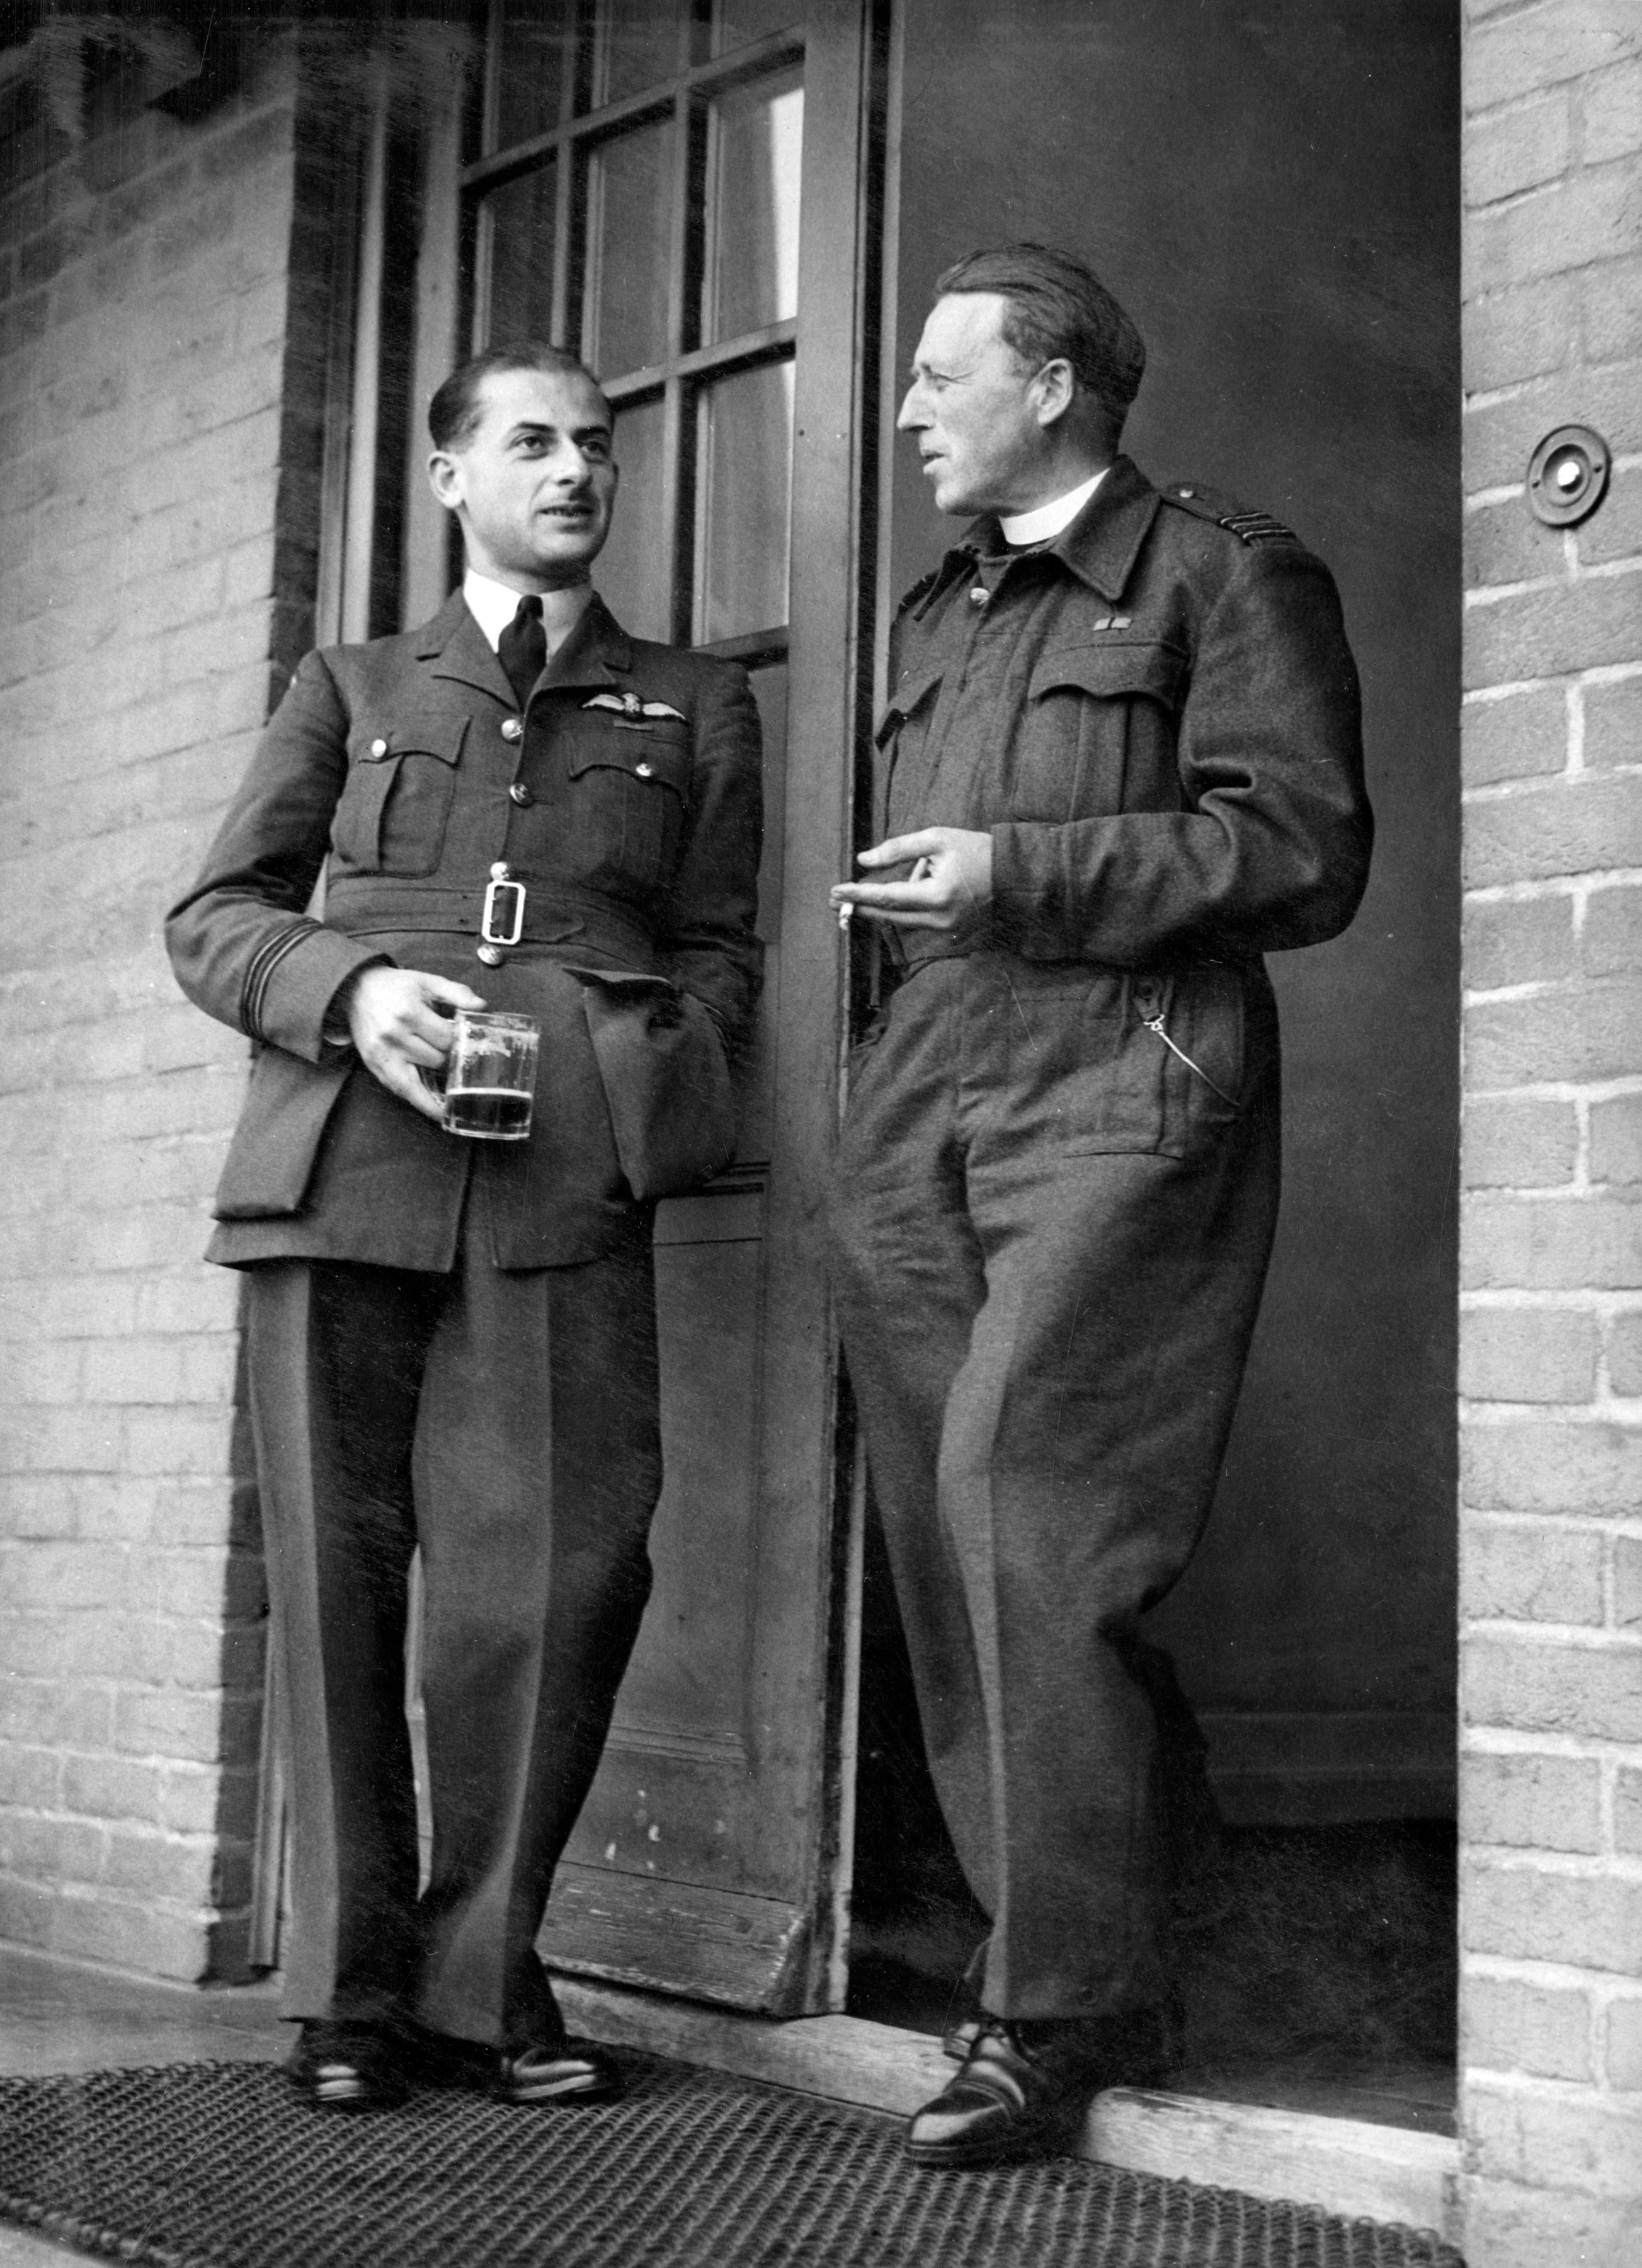 Flight Lieutenant and chaplain talk at the door; one smokes while the other drinks.